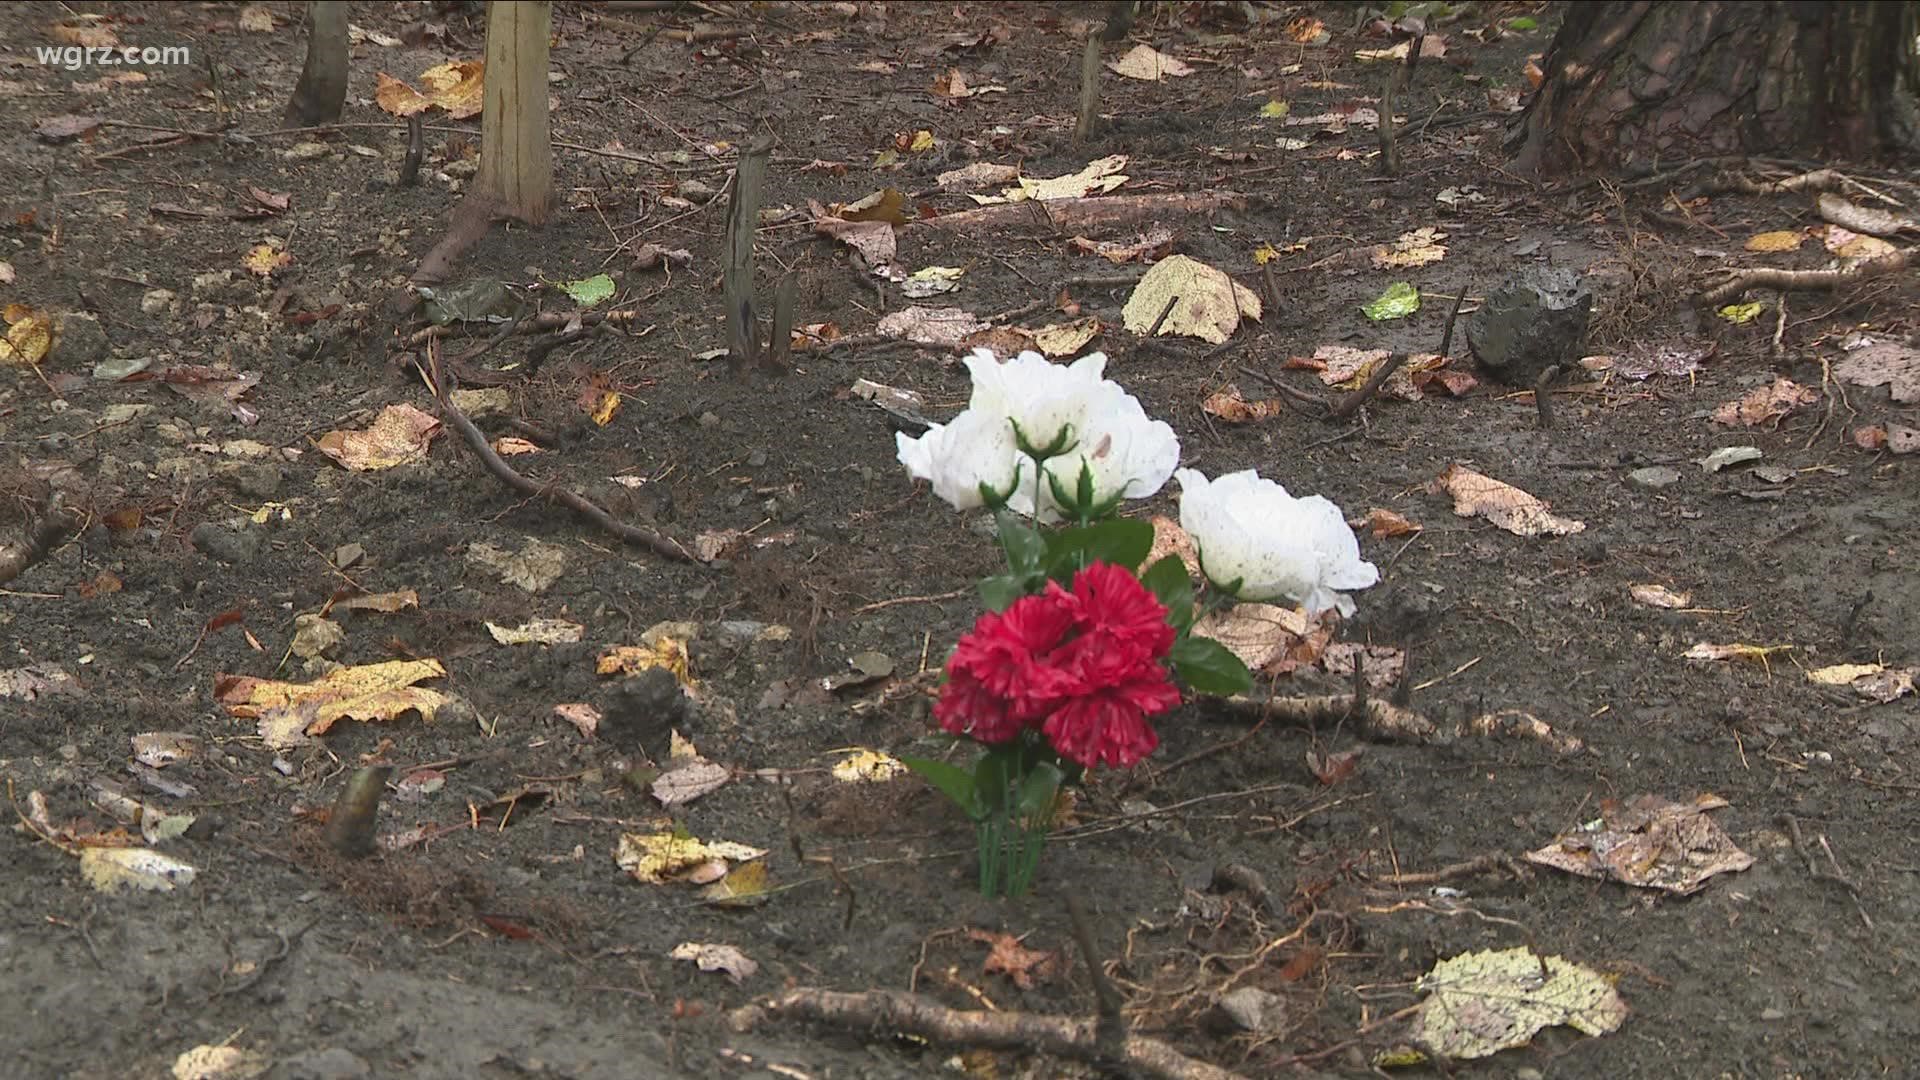 Chautauqua County authorities were back at the rails-to-trails paths, searching for more evidence, following the discovery of two sets of human remains last week.